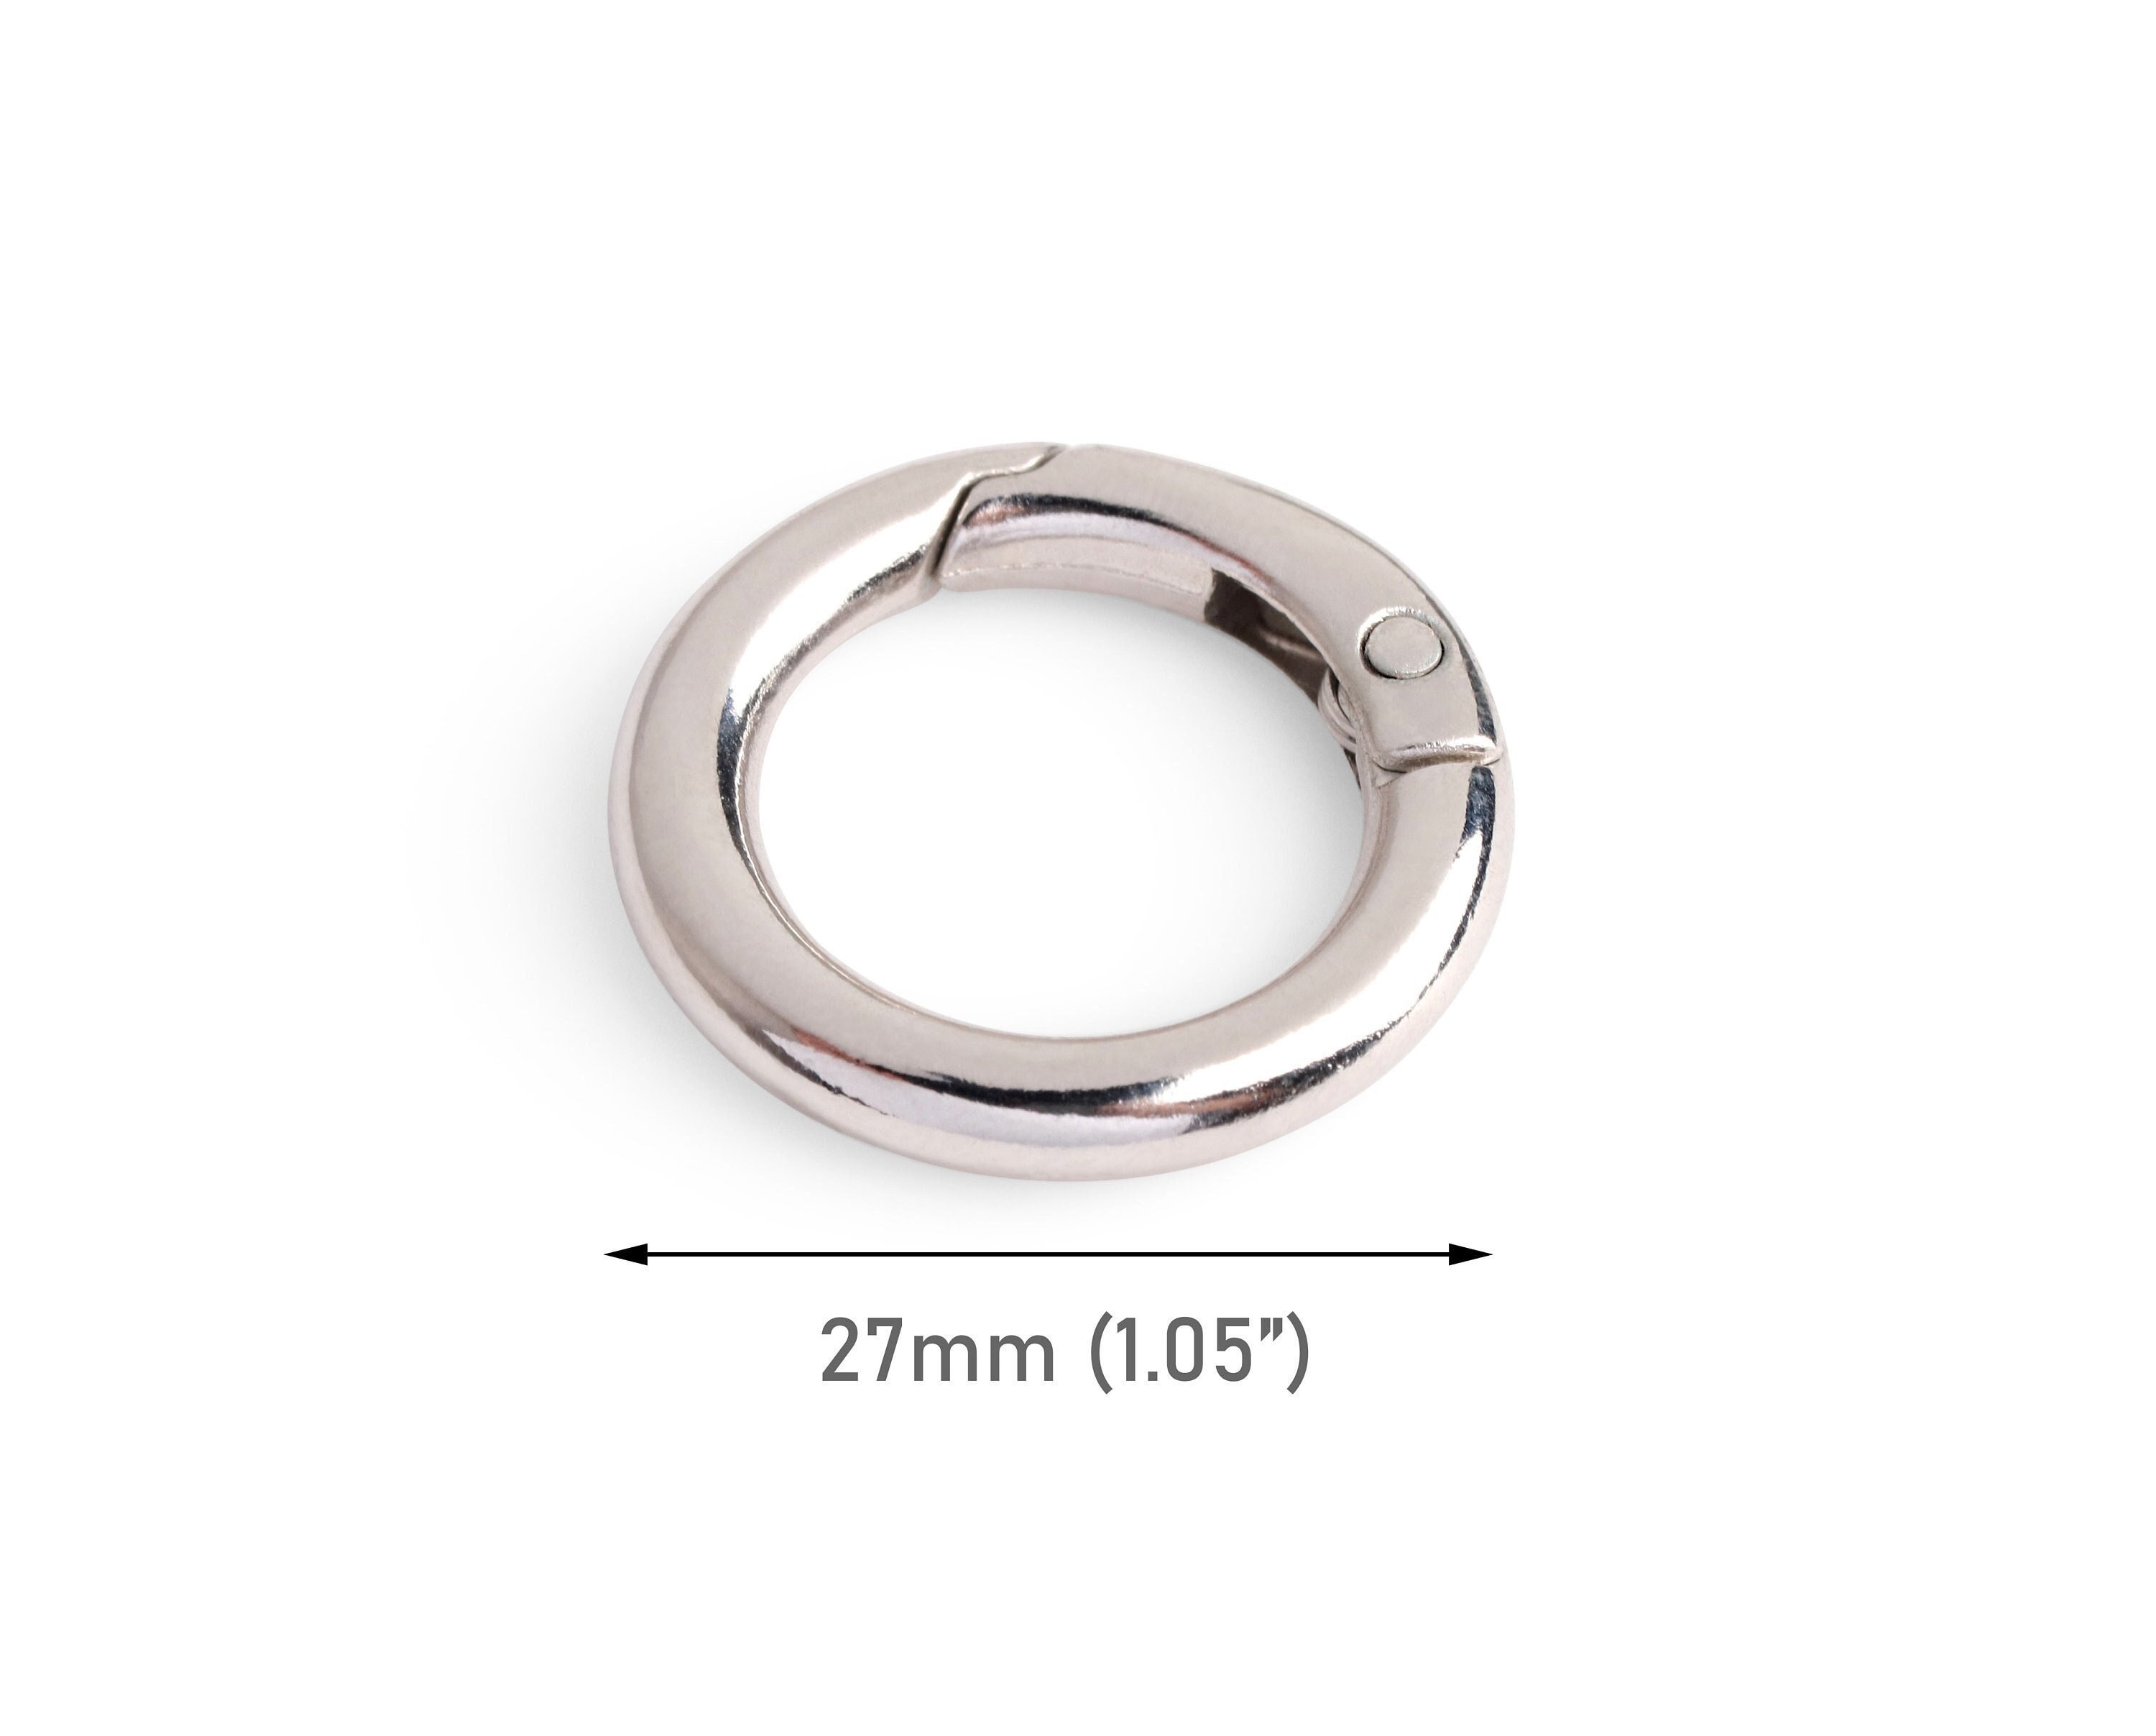 2 Gold Spring Gate Clips, Bag and Purse Strap Attacher Rings, O Ring, Round  Carabiner, Zinc Alloy Metal, 1.05 Inch